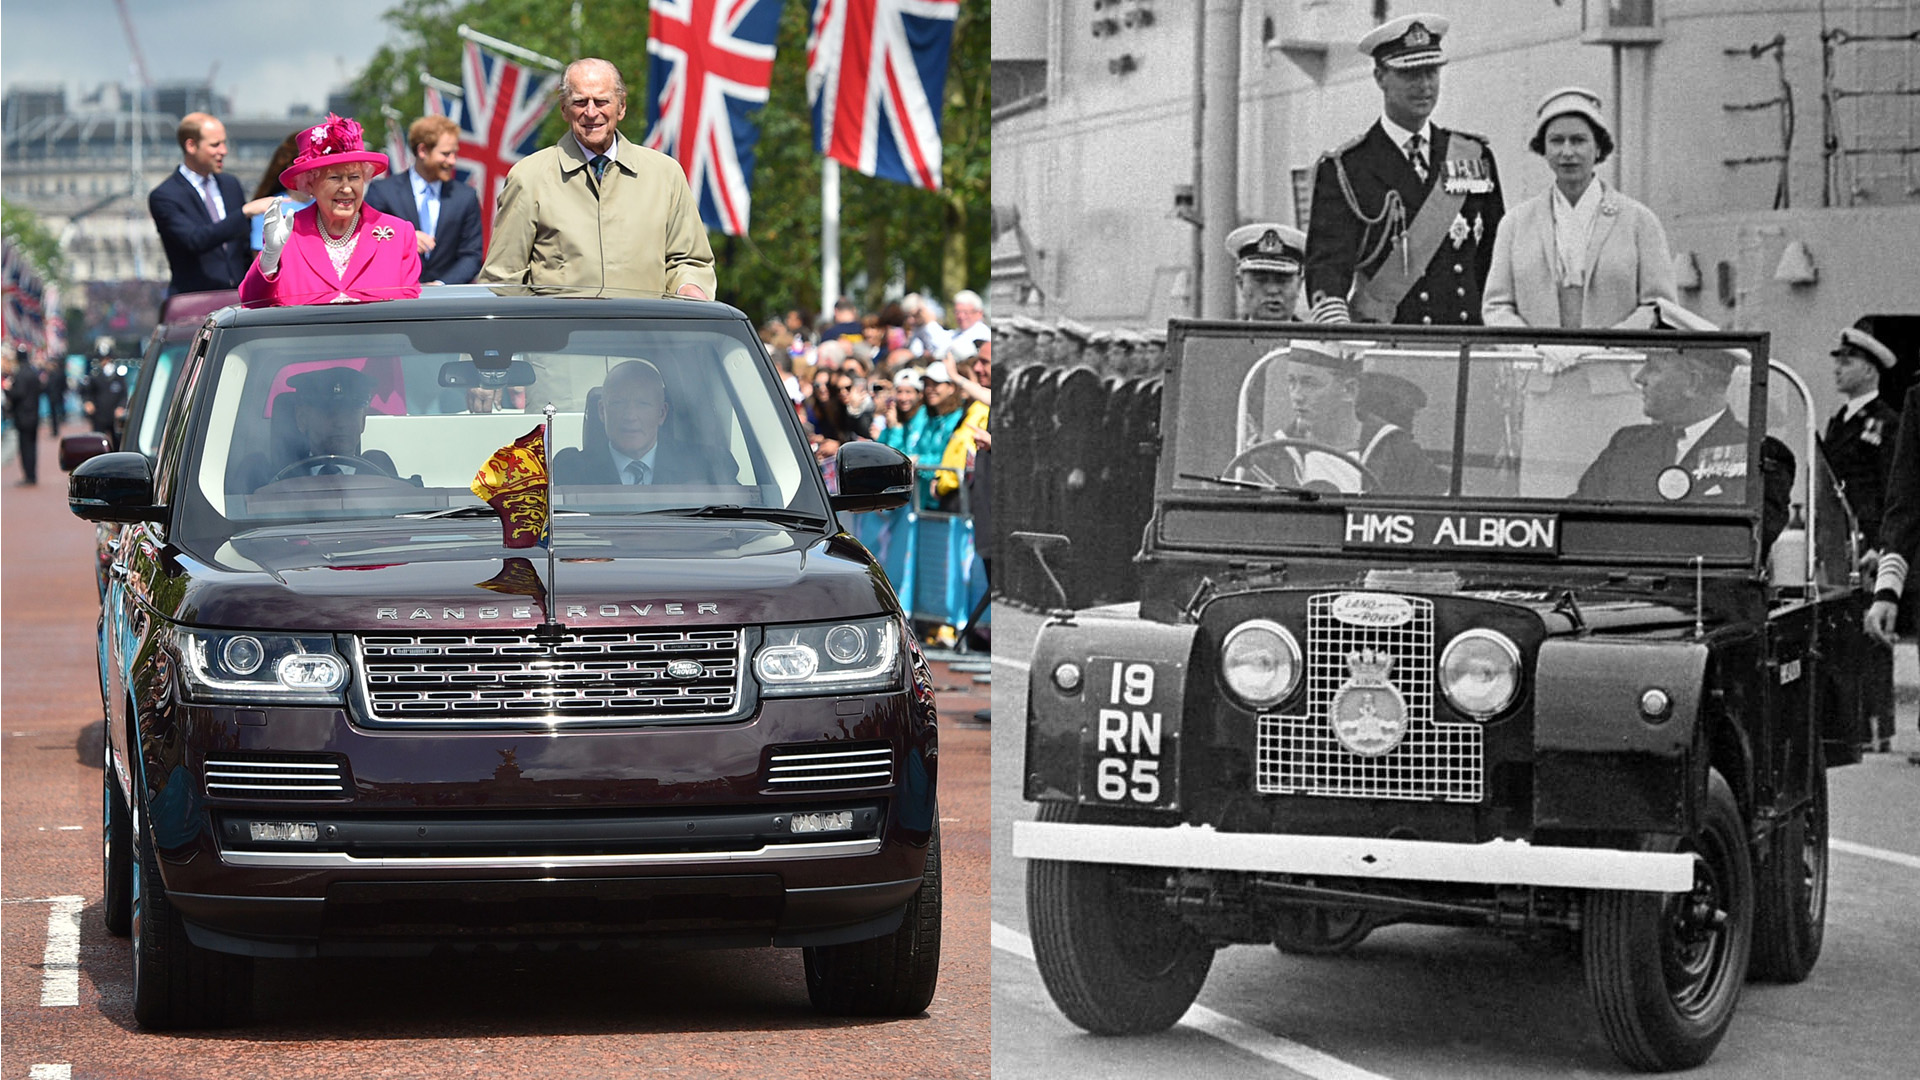 The climax of a reign of 70 years and a common denominator.  Queen Elizabeth II riding a Land Rover car